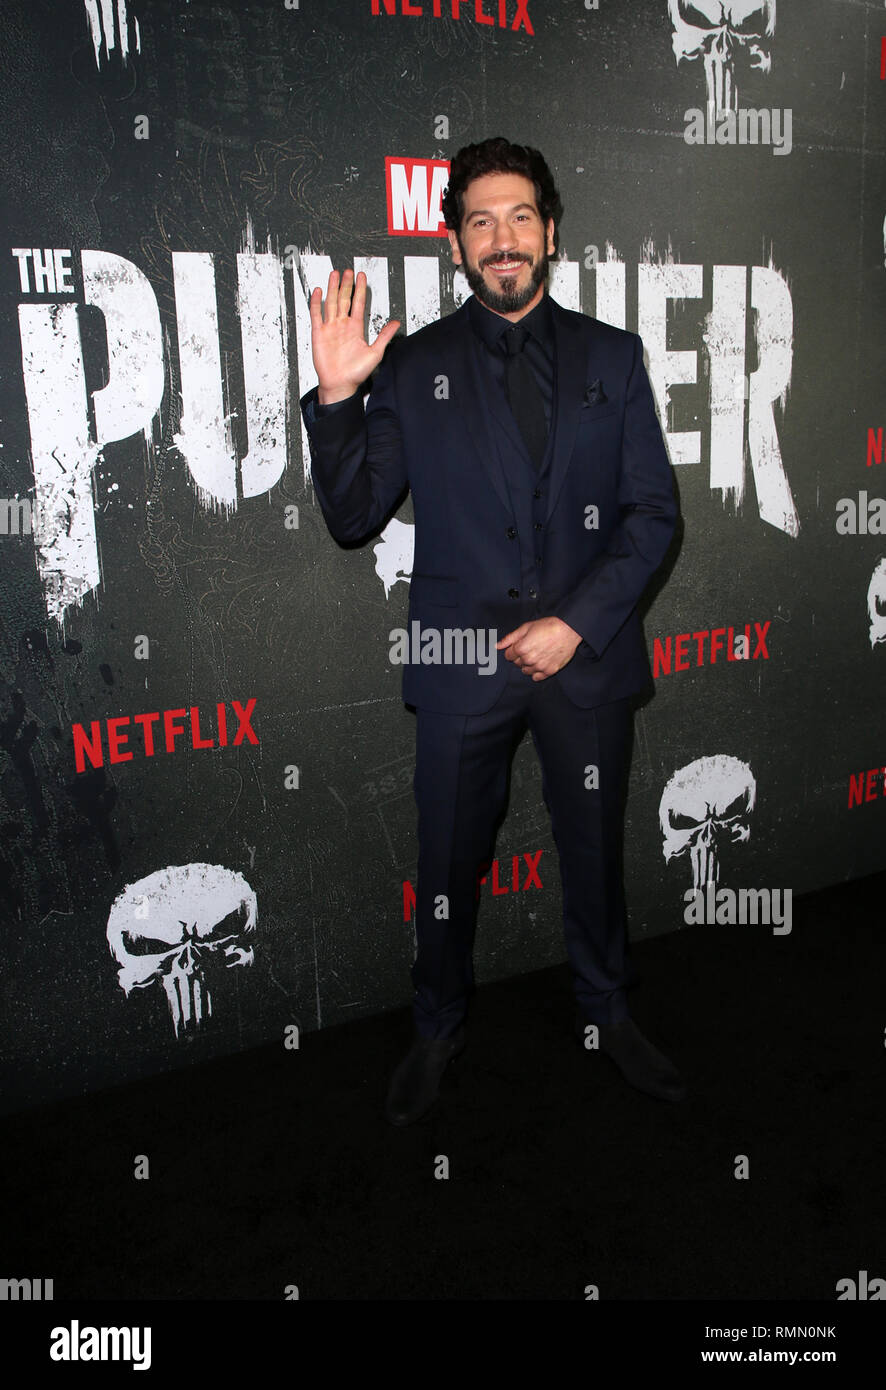 Marvel's "The Punisher" Los Angeles Premiere  Featuring: Jon Bernthal Where: Hollywood, California, United States When: 14 Jan 2019 Credit: FayesVision/WENN.com Stock Photo